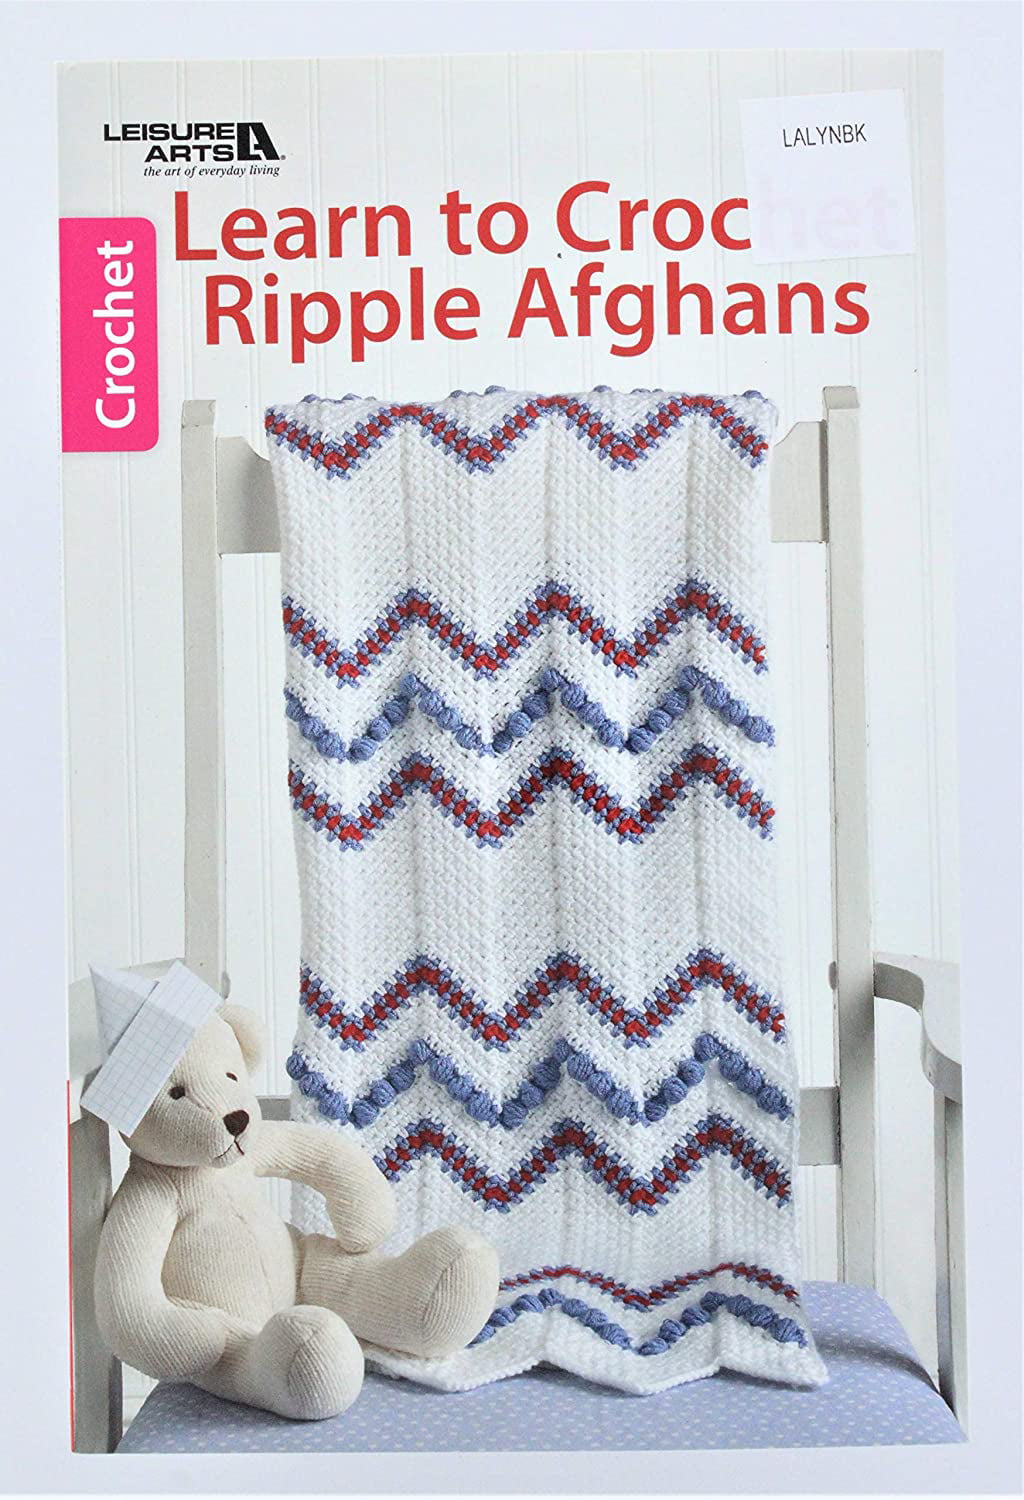 INC. LEISURE ARTS - NEW PAPERBACK BOOK LEARN TO CROCHET RIPPLE AFGHANS COR 